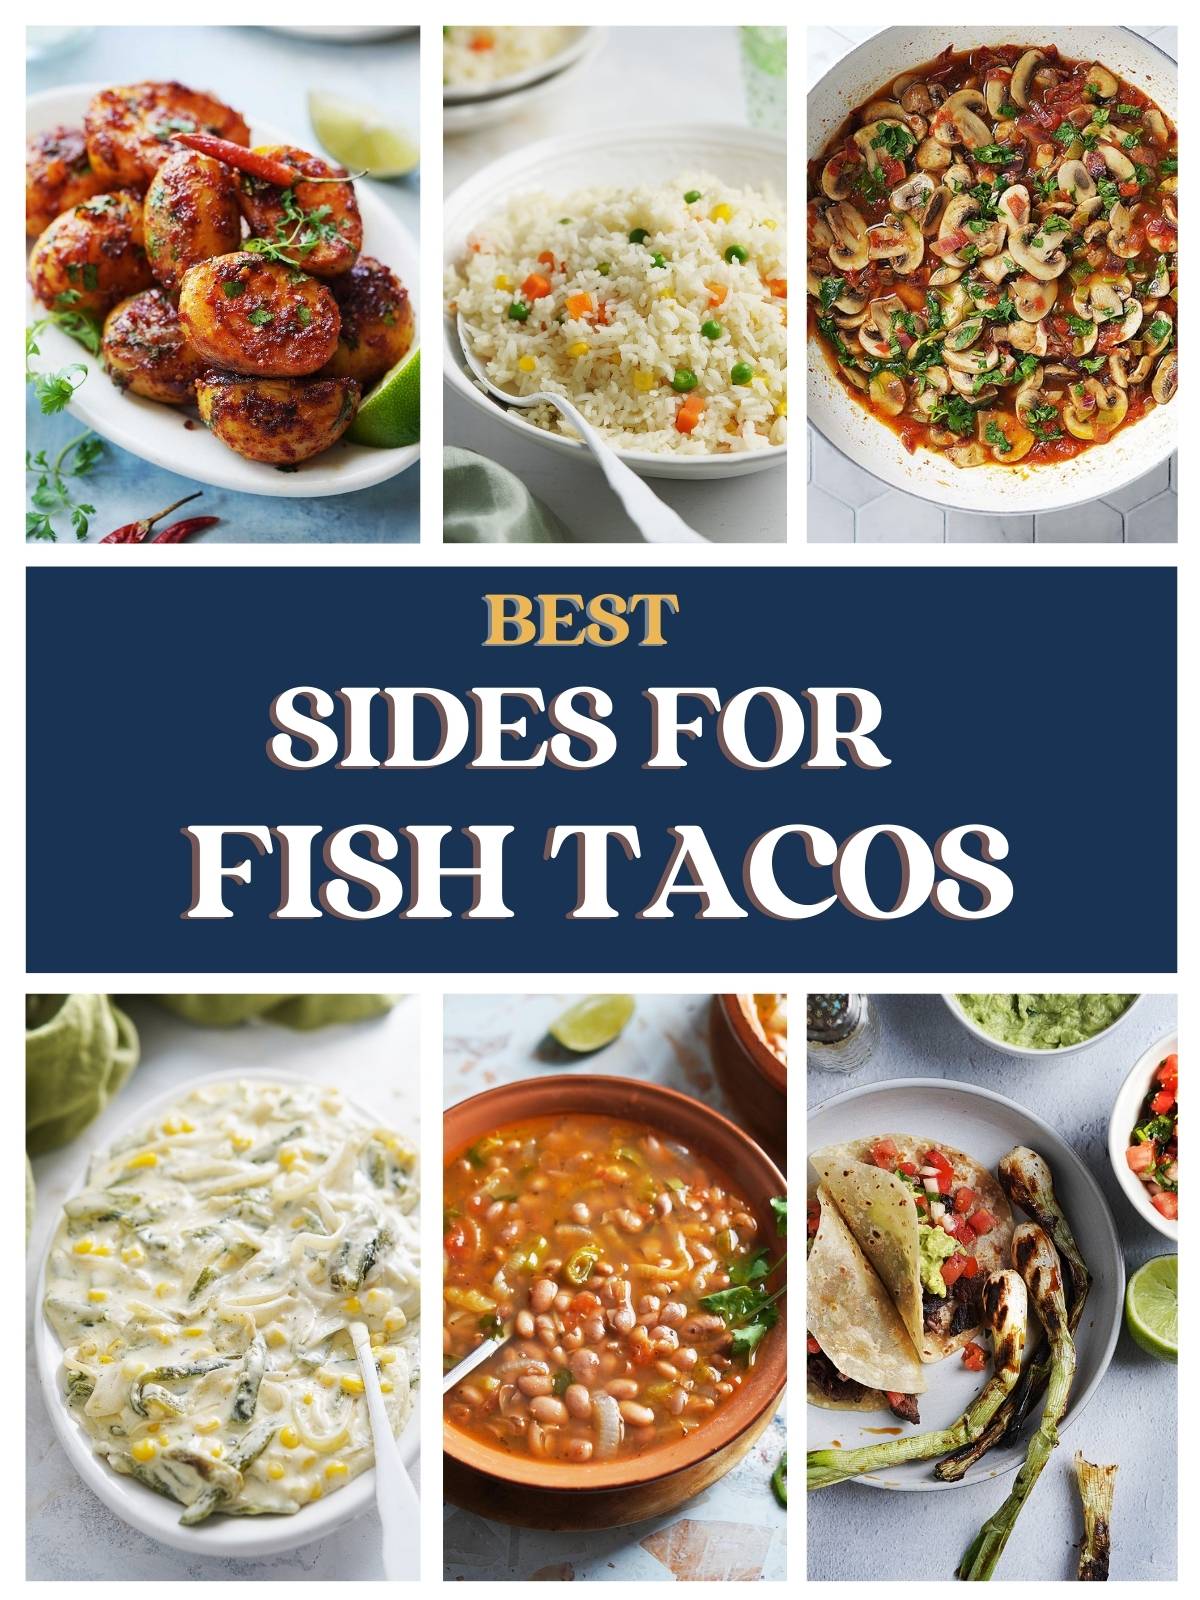 Best Sides For Fish Tacos